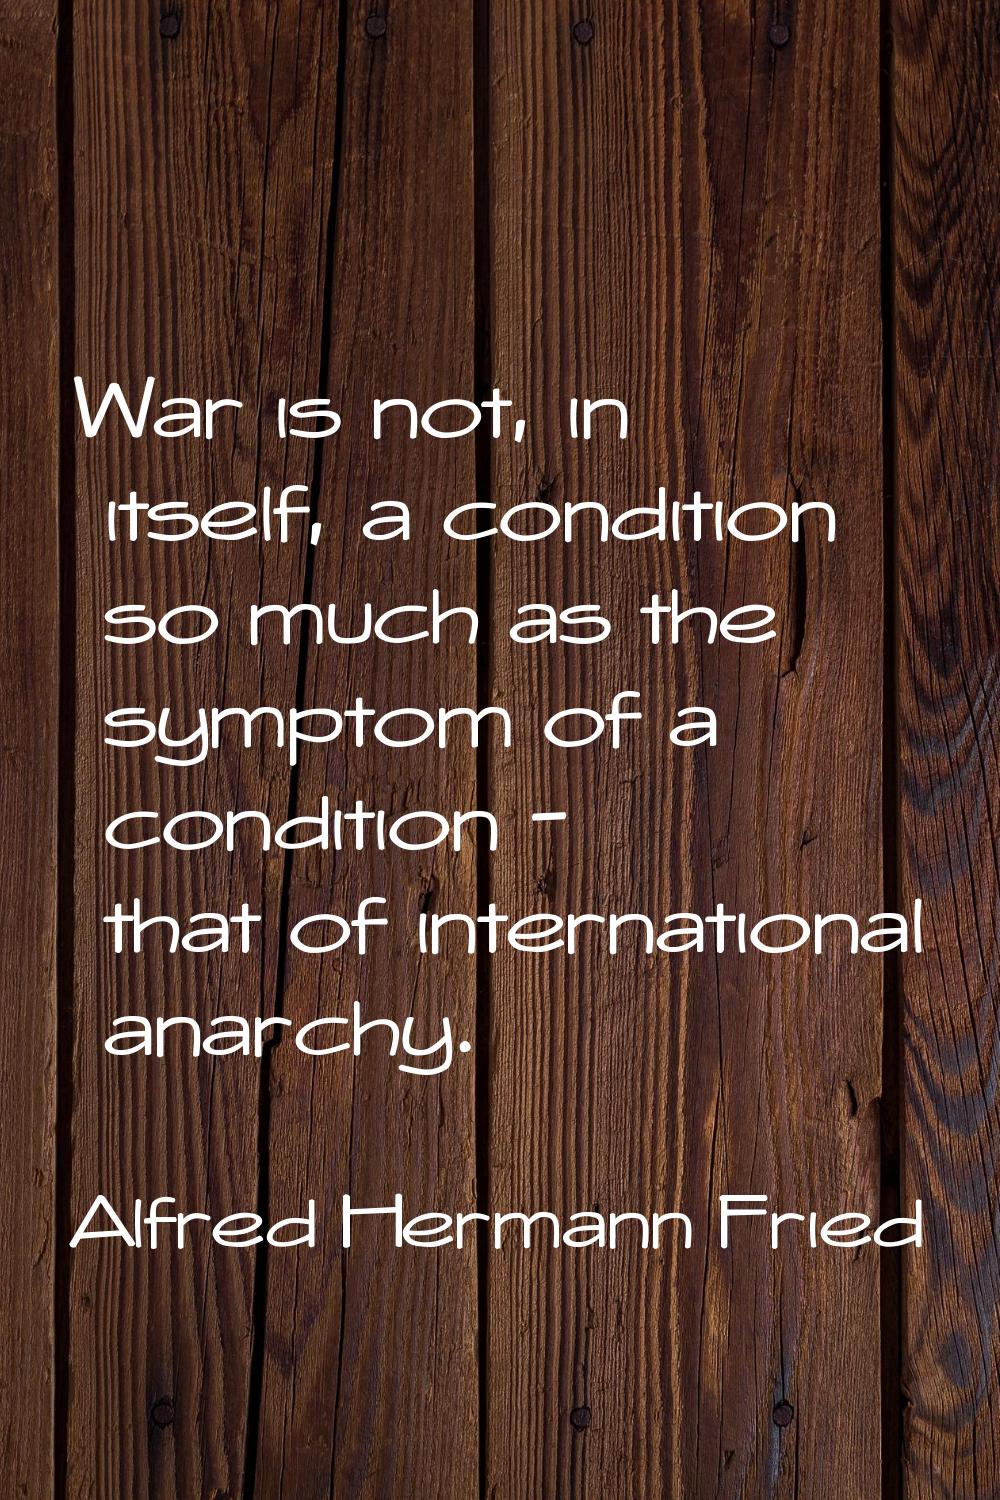 War is not, in itself, a condition so much as the symptom of a condition - that of international an